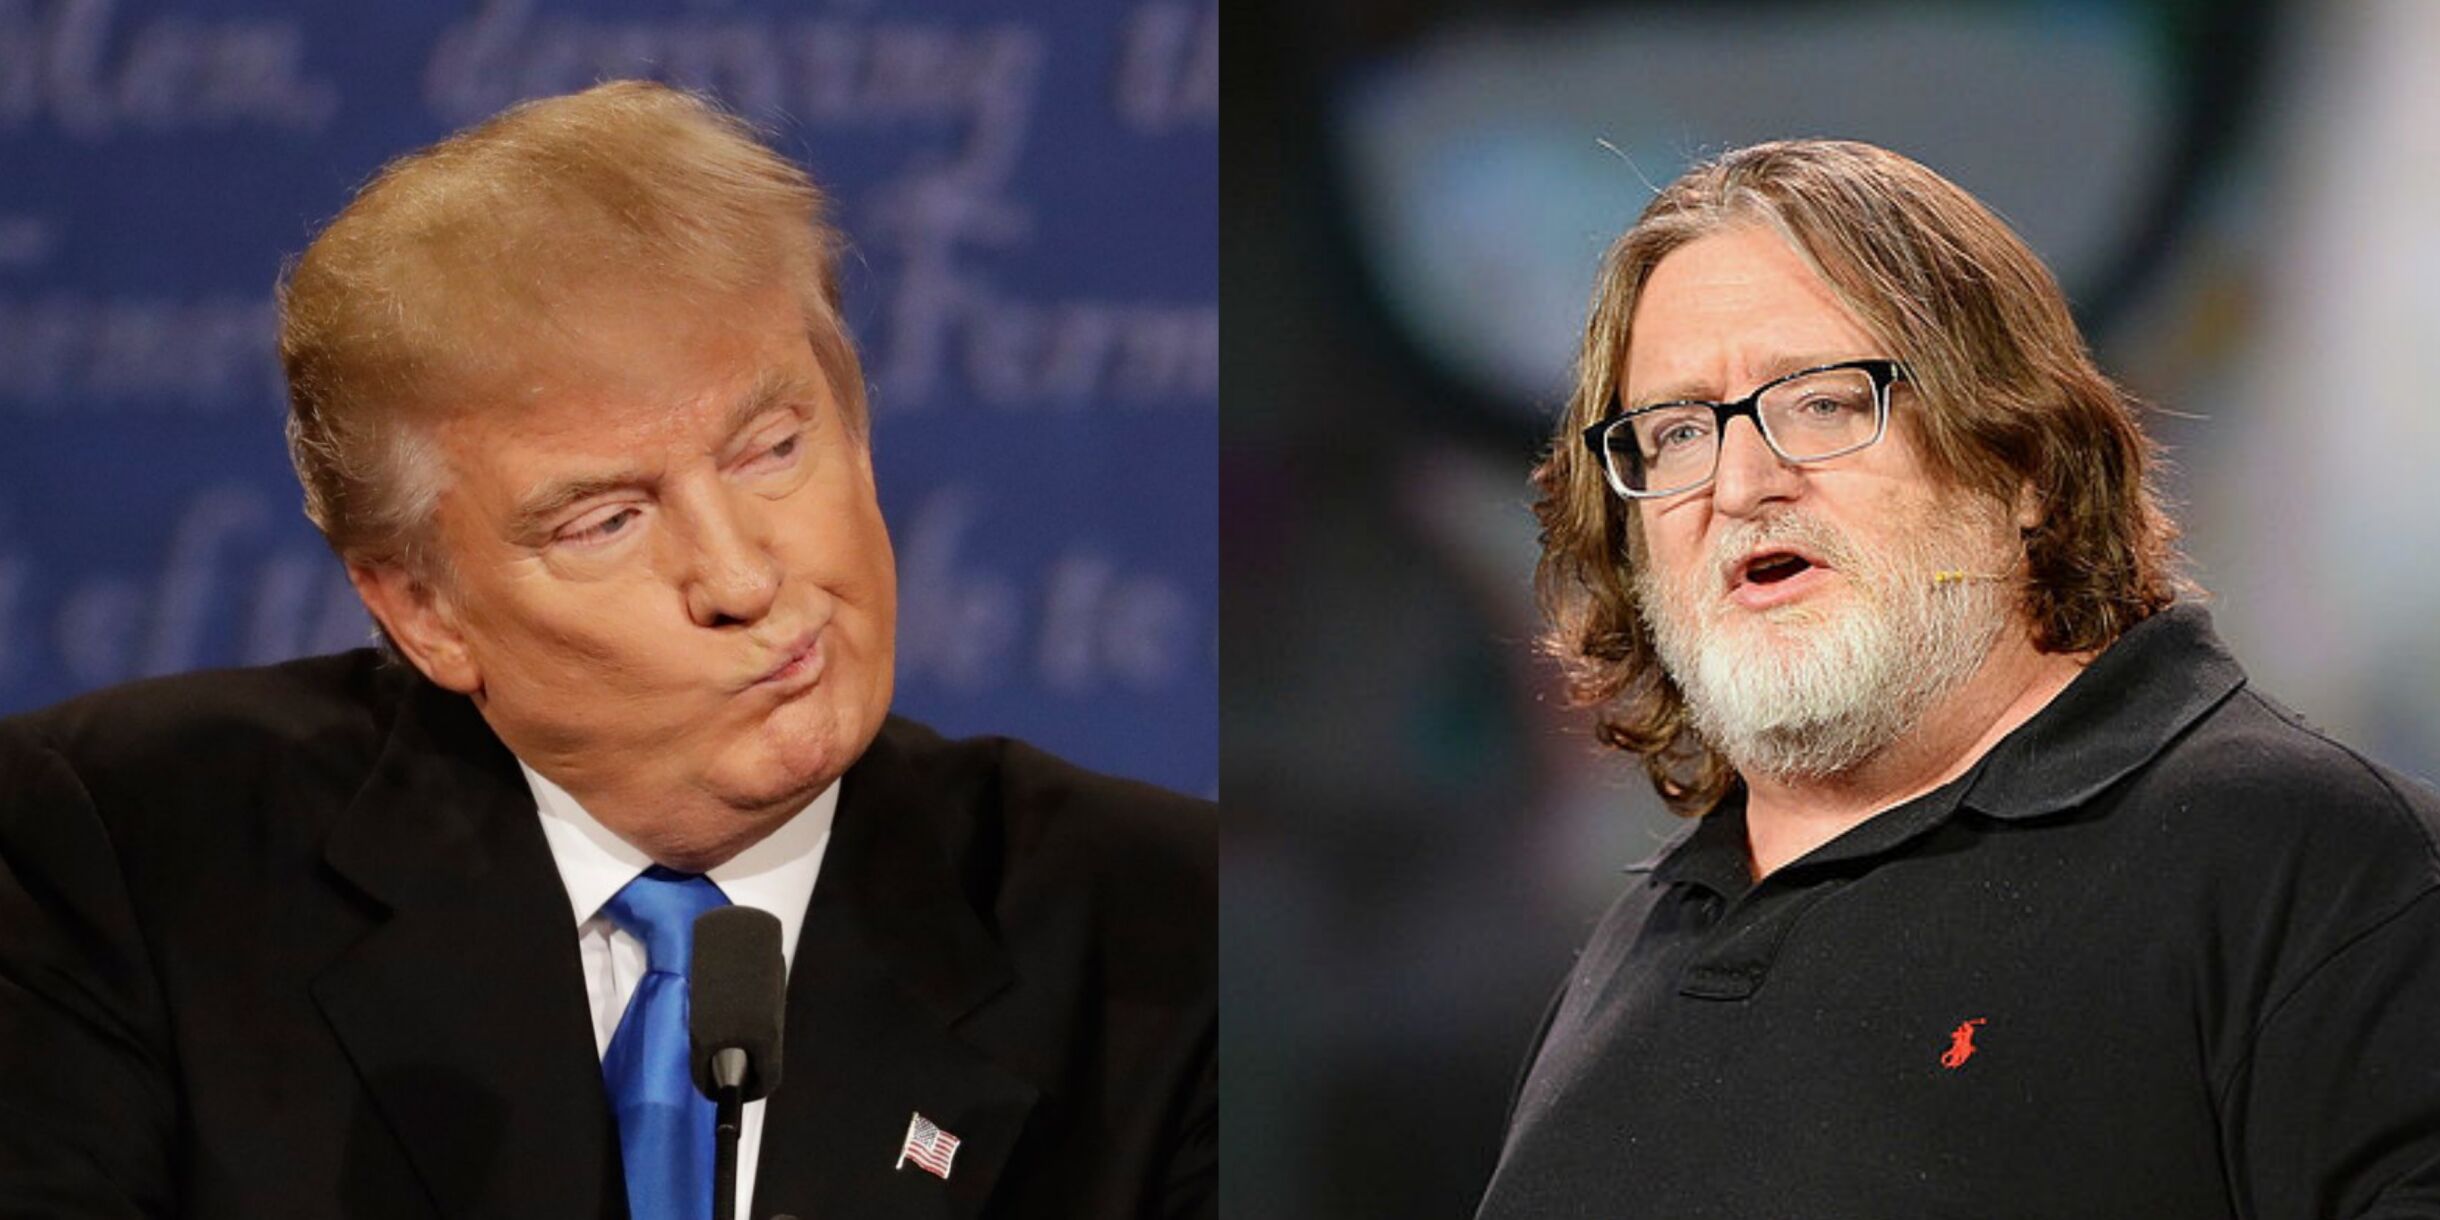 Grab The Games - Gabe Newell for president of US?